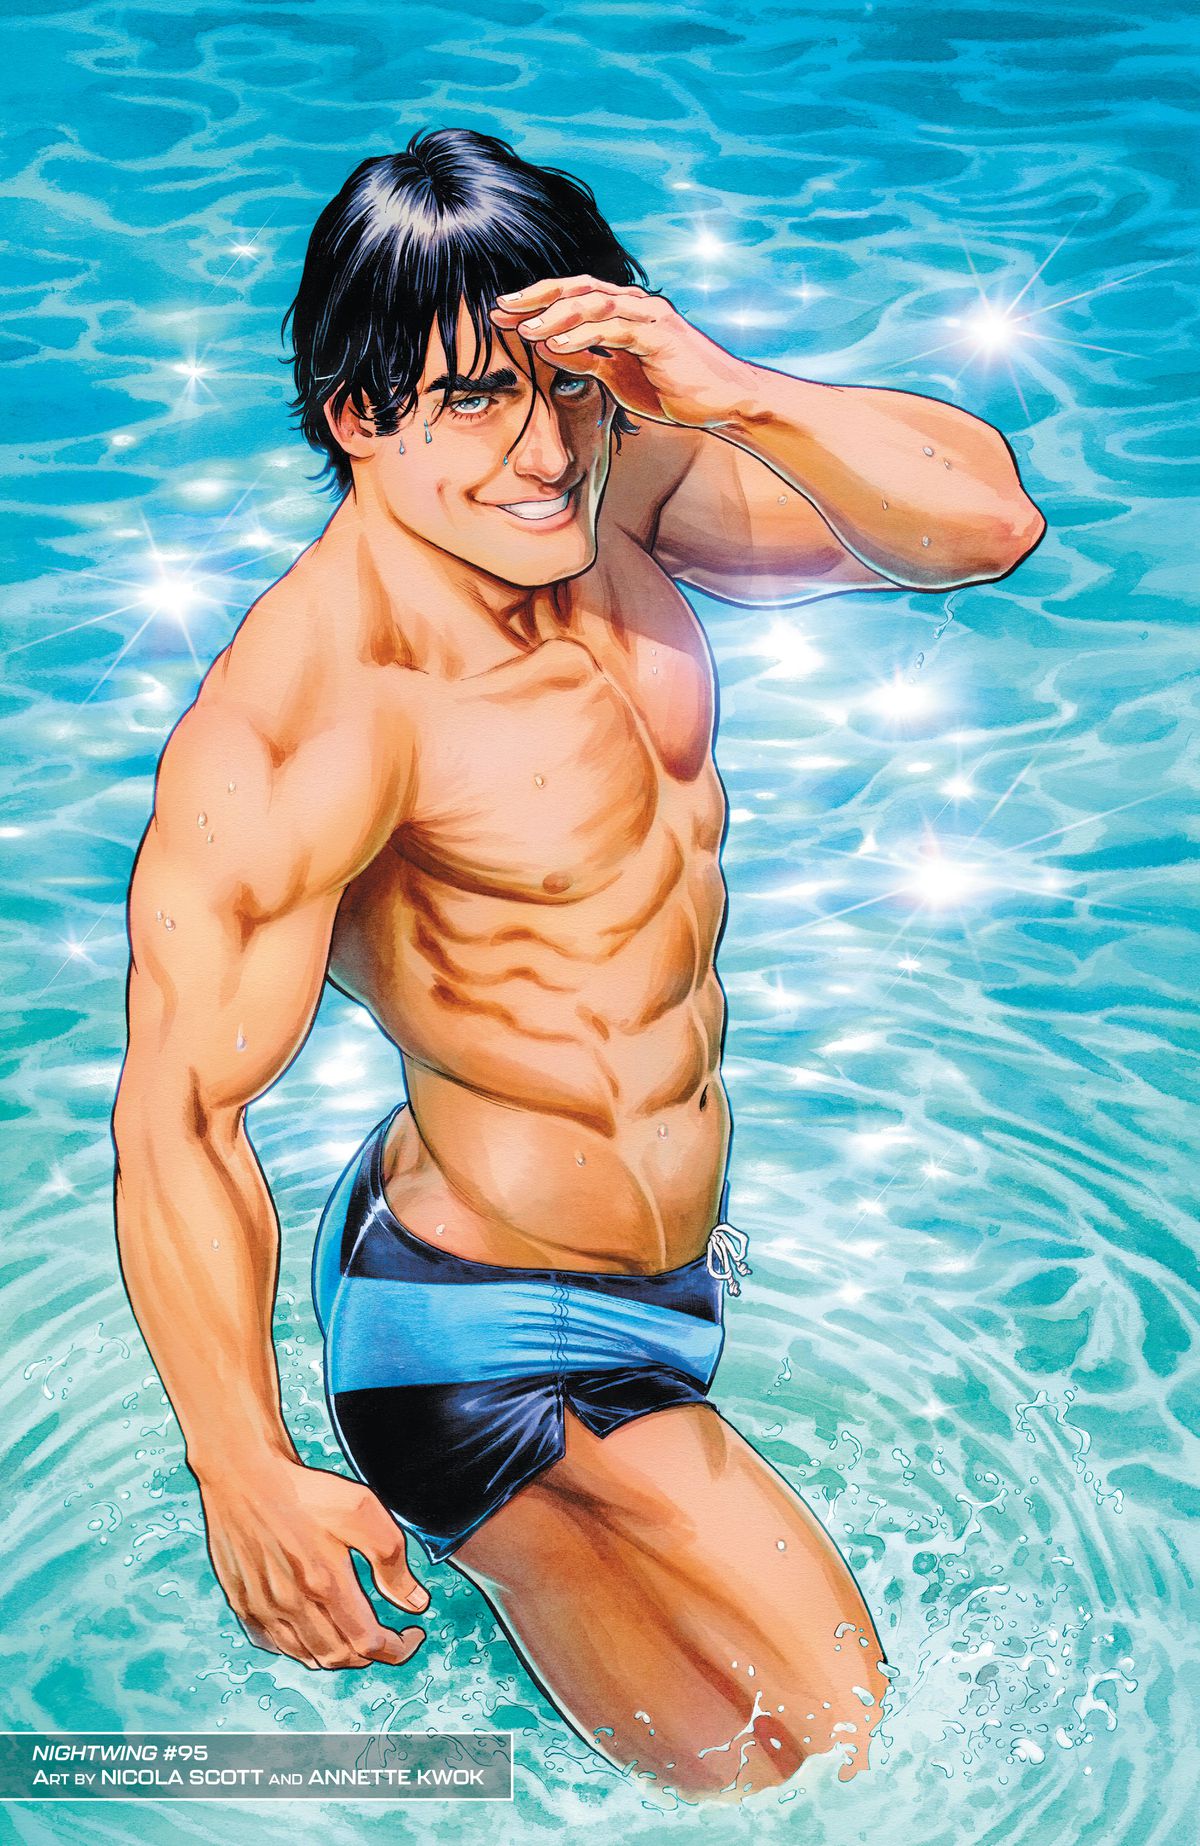 Dick Grayson shields his eyes, looking up from where he’s standing in sparkling water, with a very small Nightwing-patterened set of drawstring swim trunks on, that highlight his butt very well.